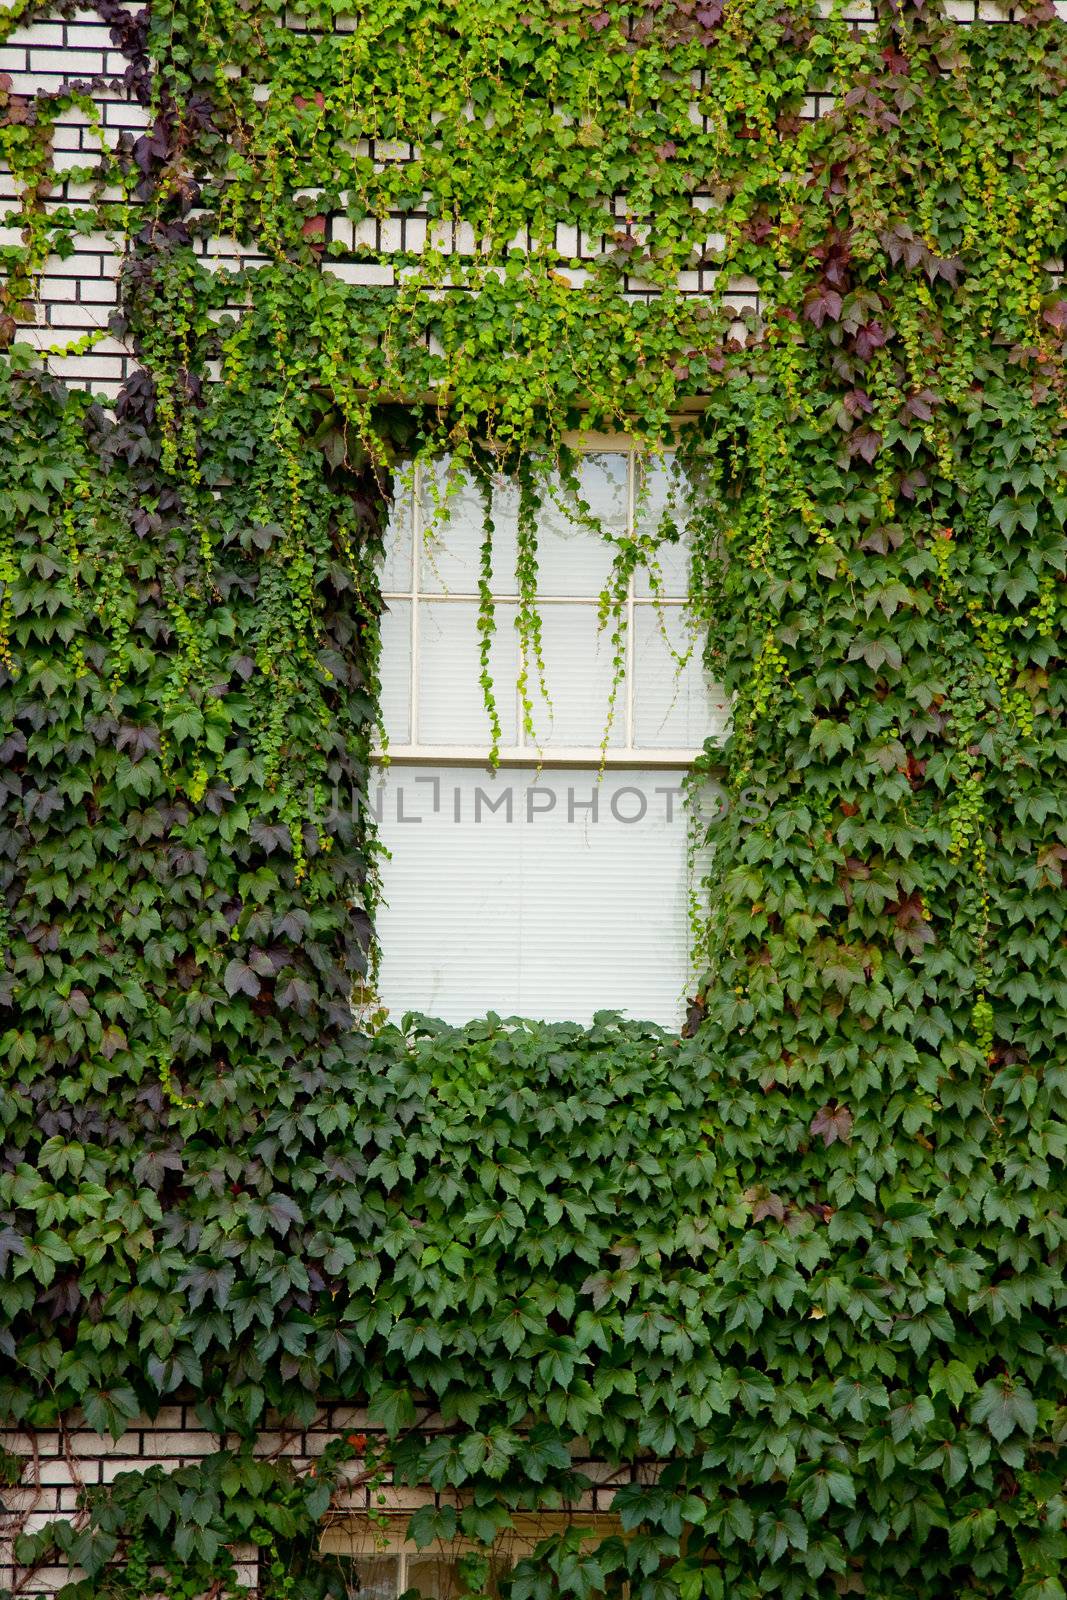 Ivy covers a building and a window in downtown portland oregon.